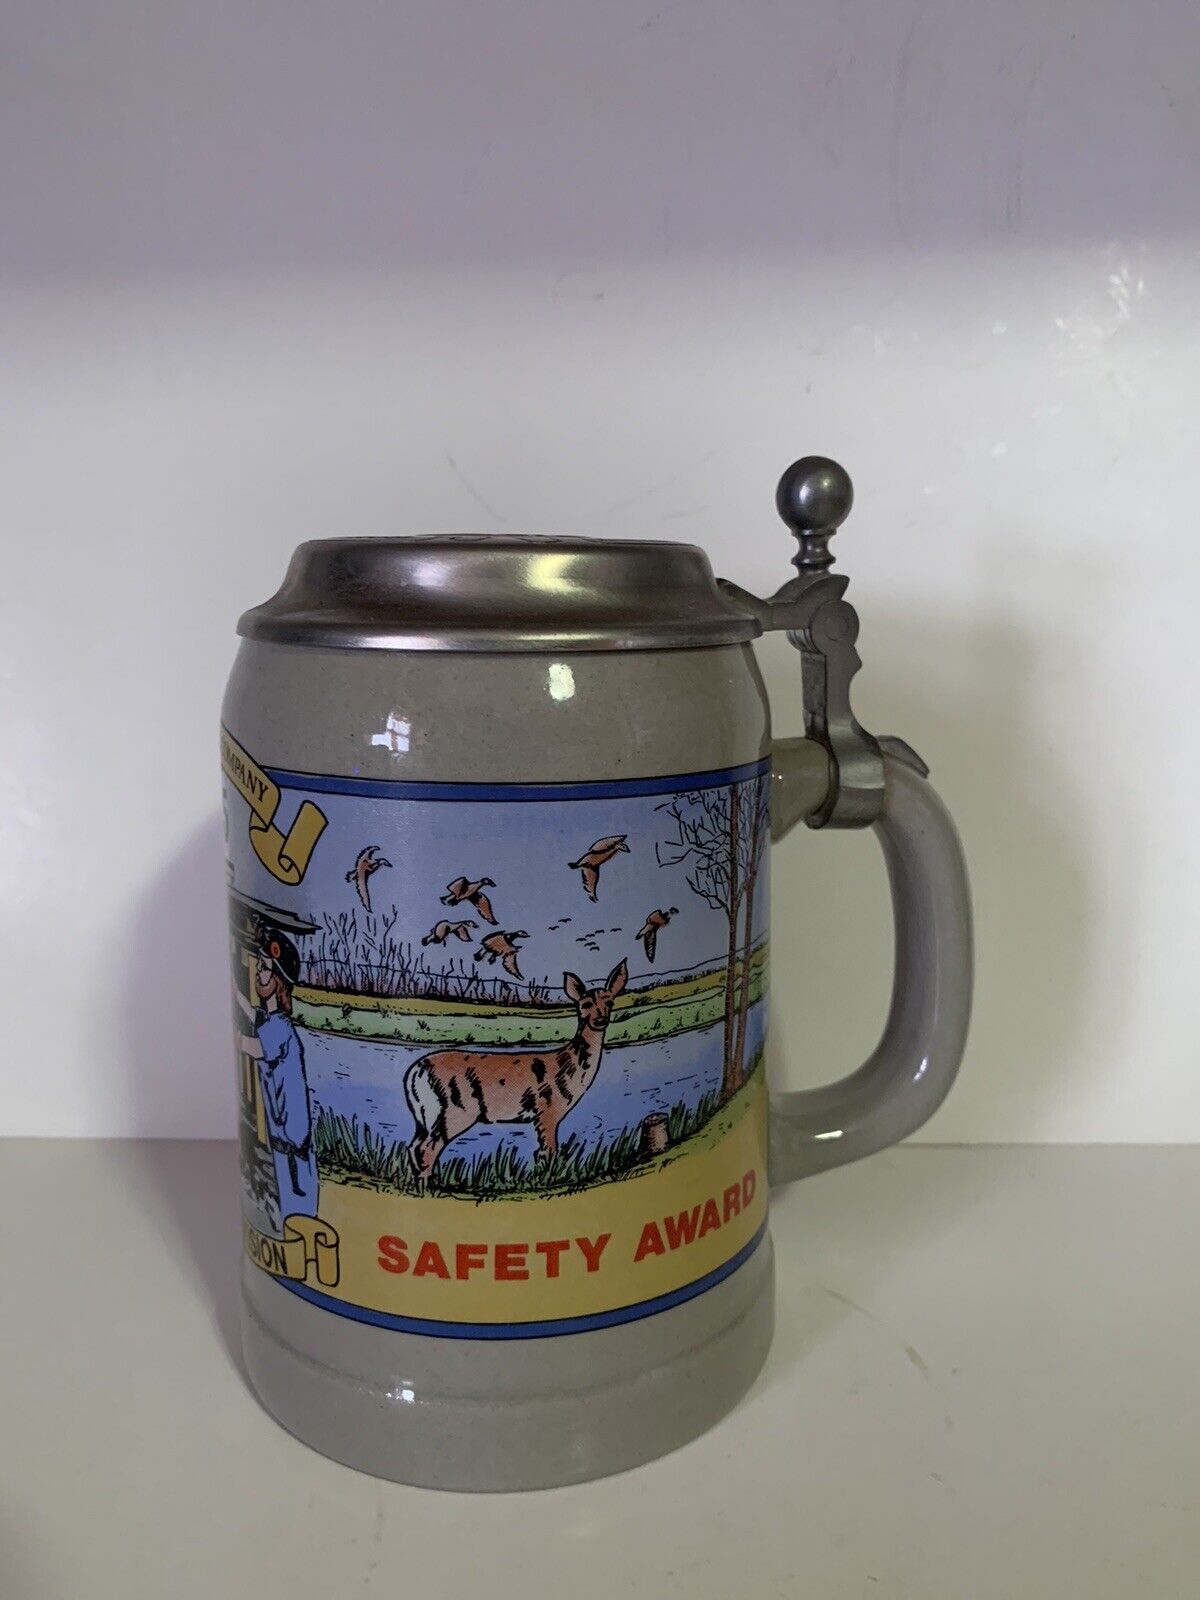 PEABODY COAL  SAFETY AWARD 1985 ILLINOIS DIVISION LIDDED STEIN #2 of 4